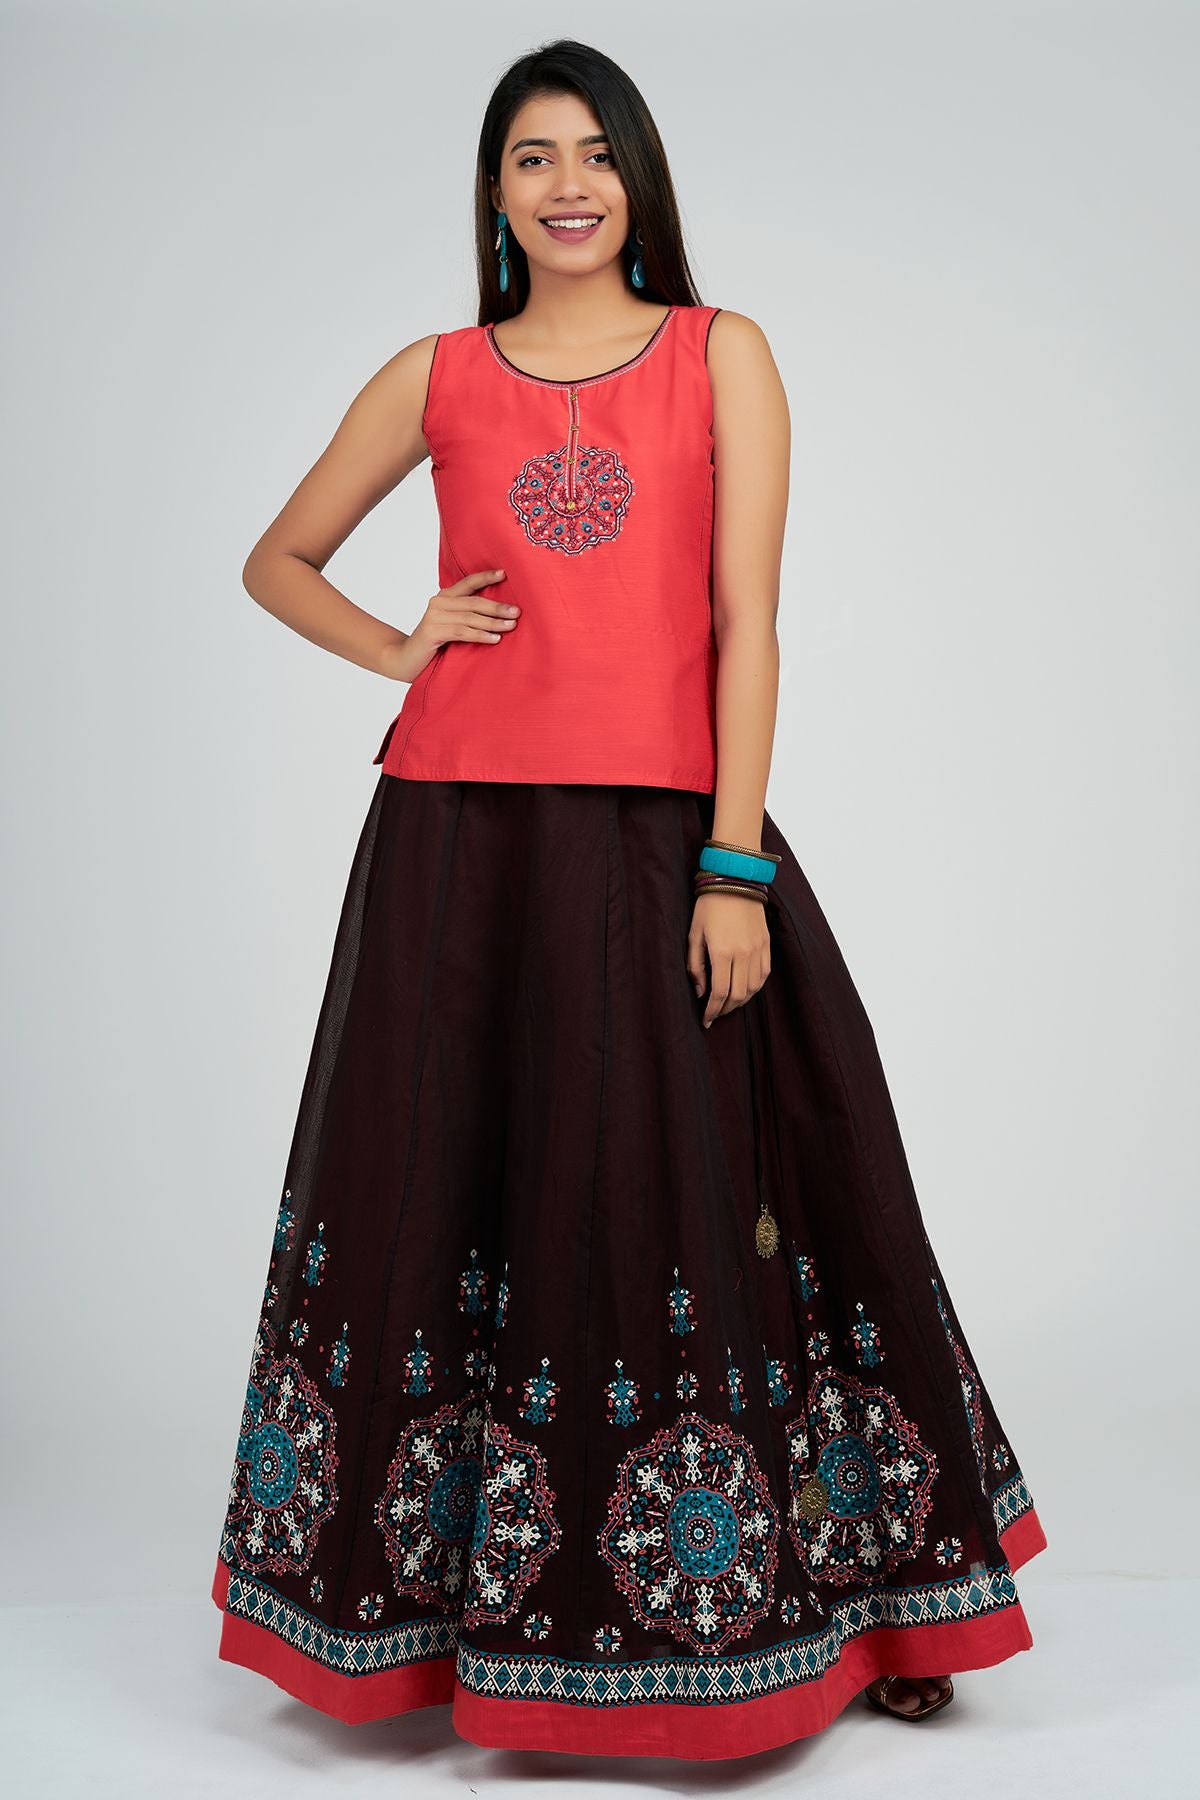 Buy Women Skirt and Top | Skirt and Top Set Online in India – Maybell ...